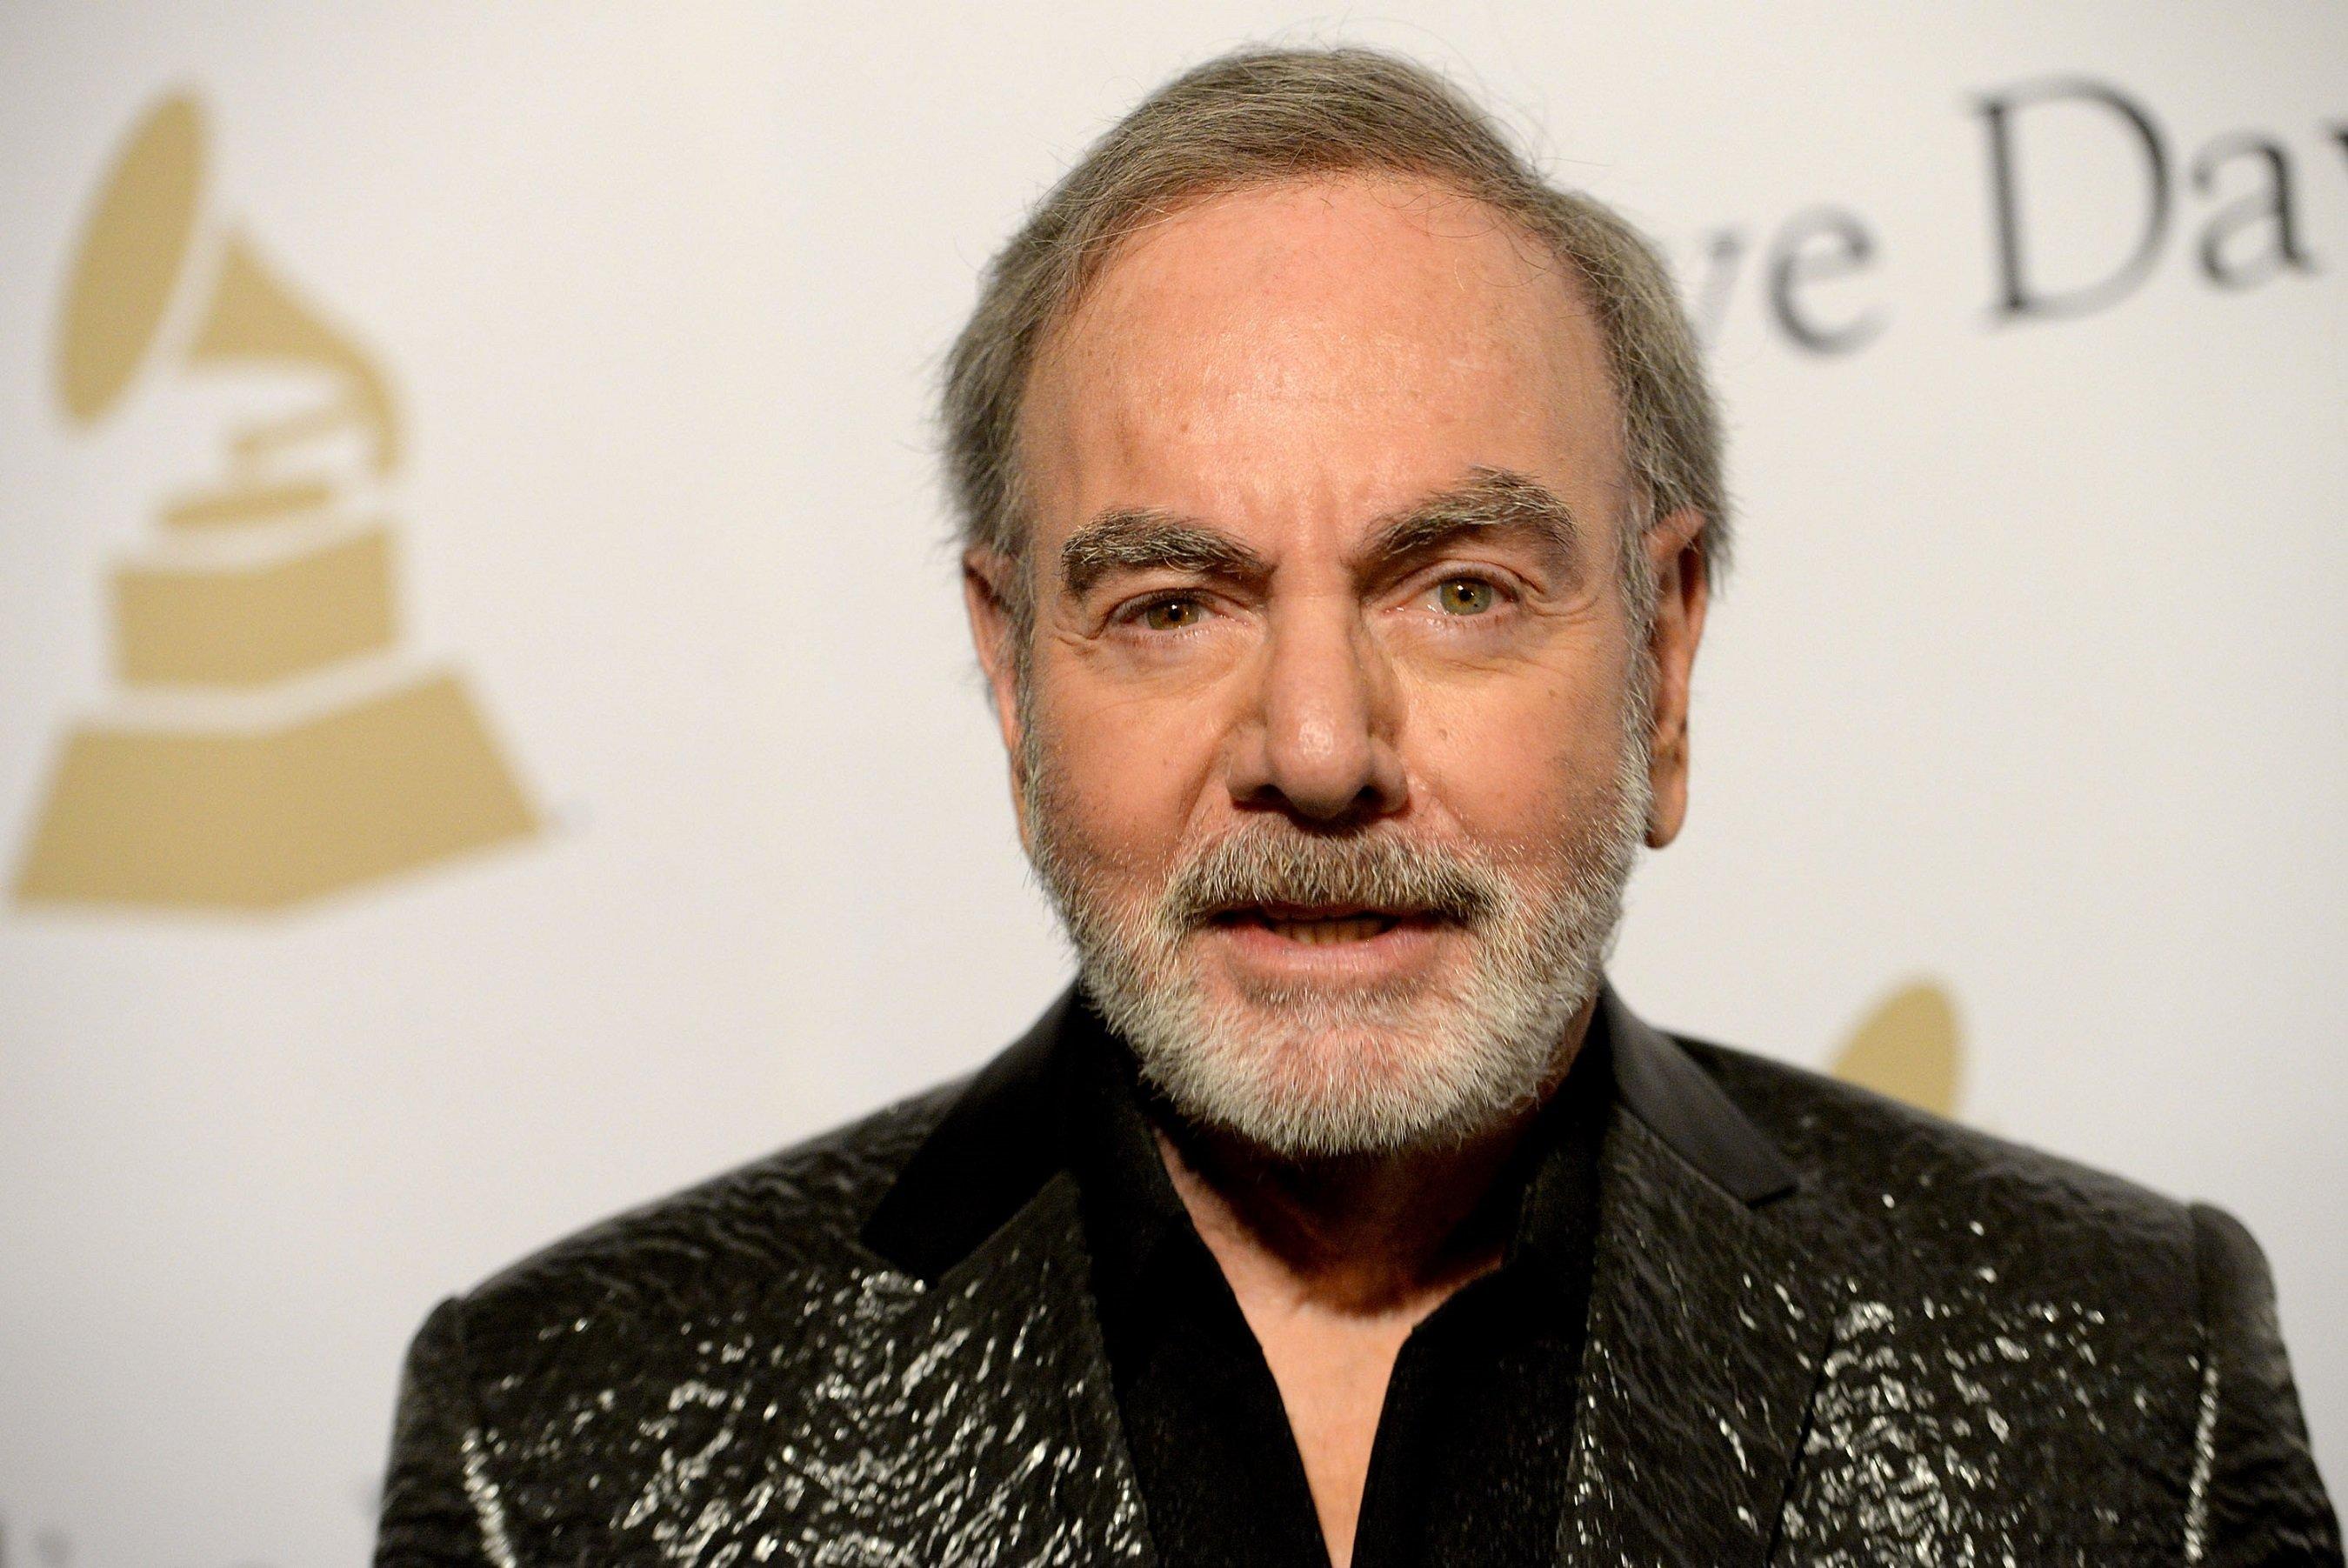 Neil Diamond, photographed in 2017